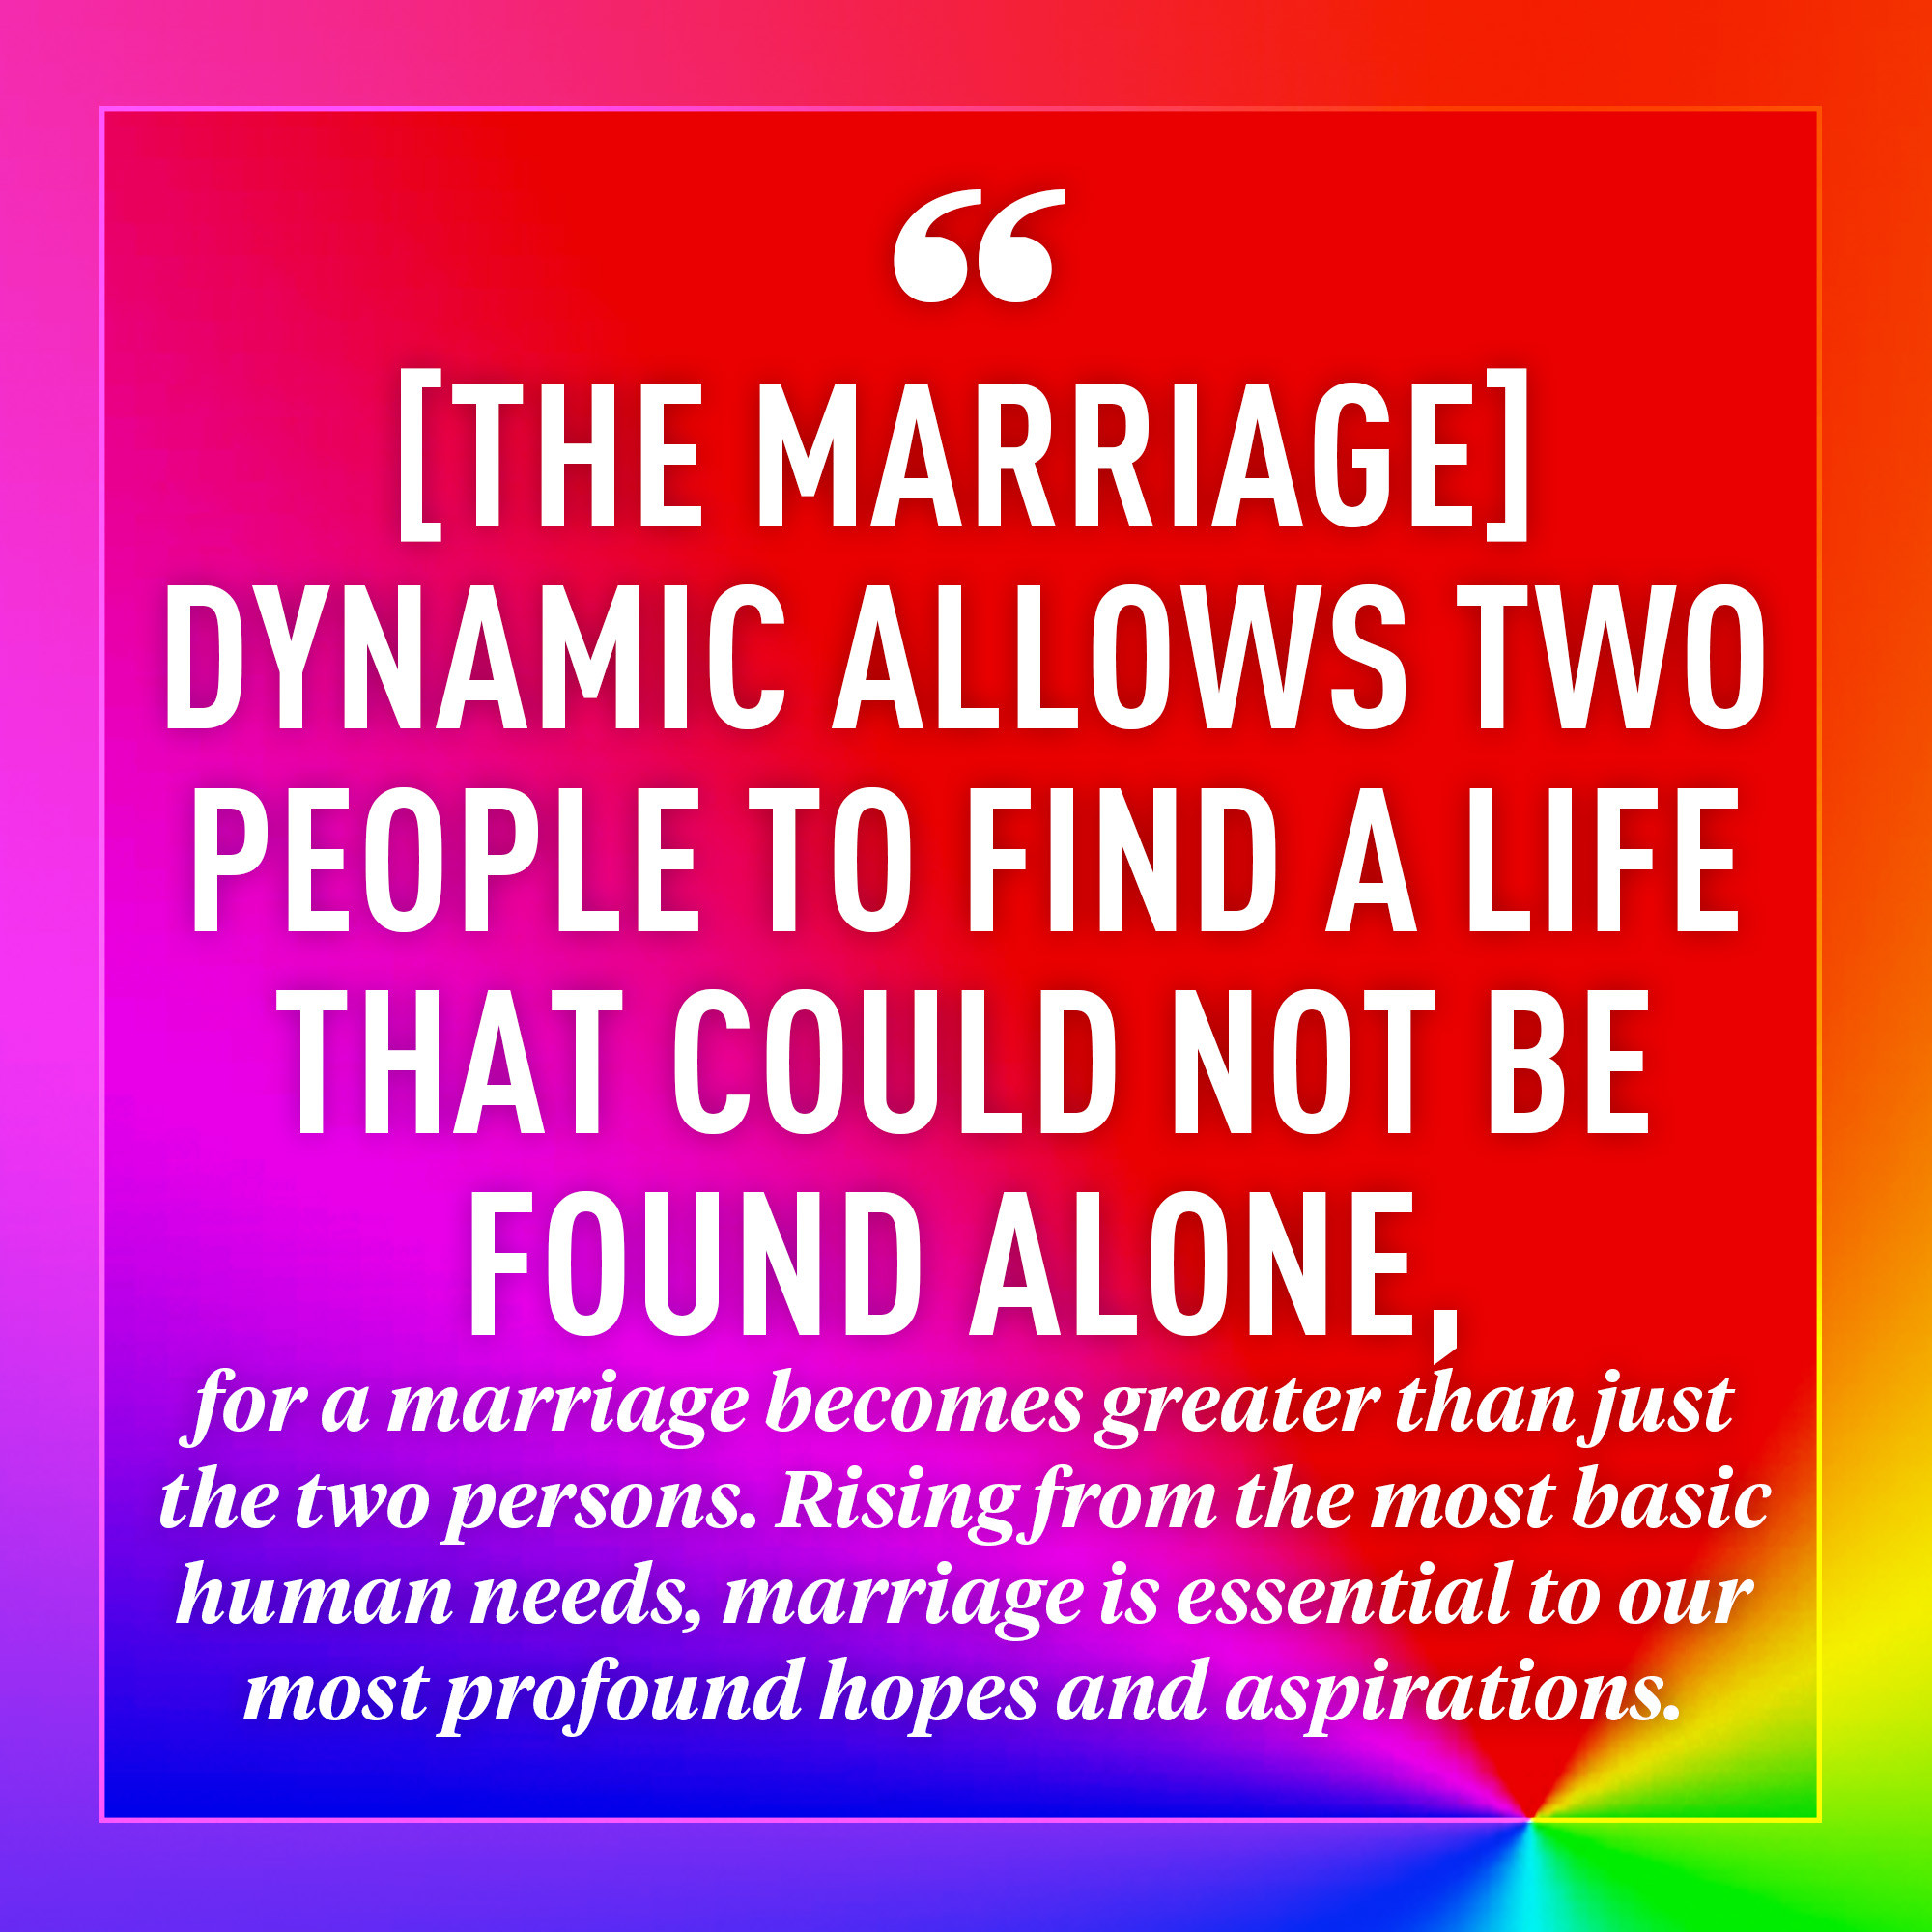 Same Sex Marriage Quotes
 The 10 Most Moving Quotes From the Supreme Court s Same